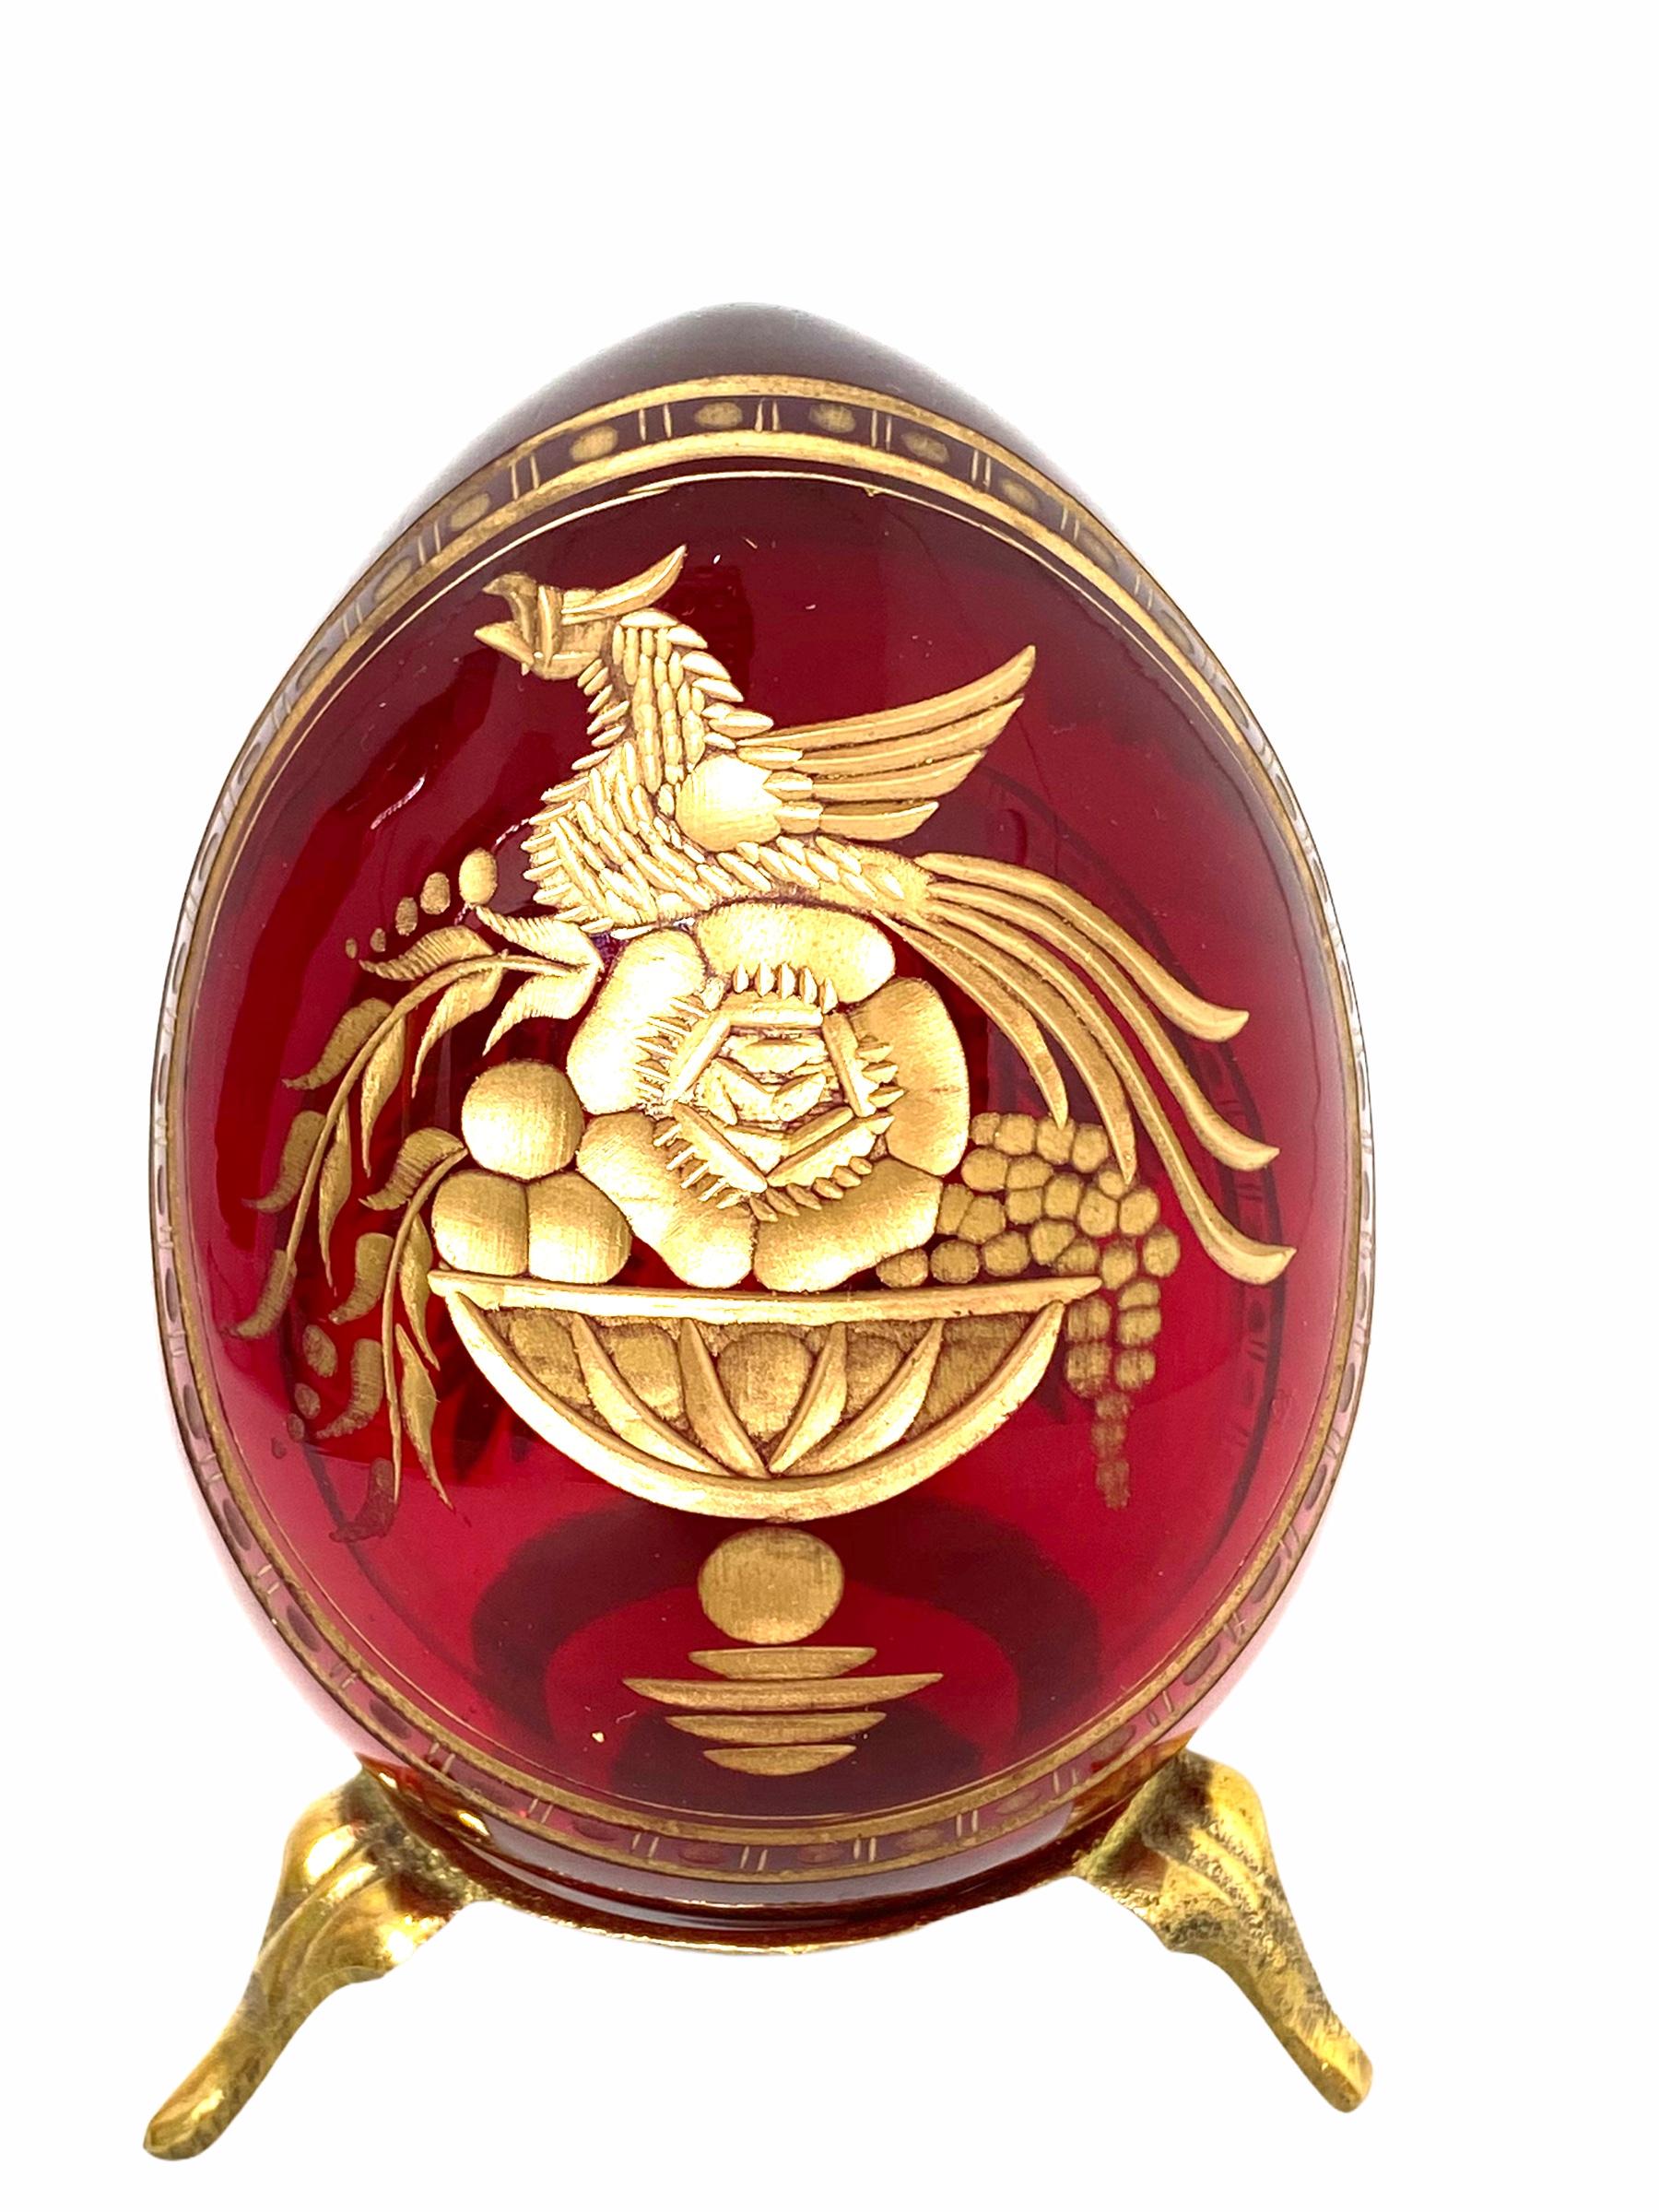 Art Nouveau Vintage Faberge Russia Style Ruby Red Glass Egg with Etched Royal Crest Monogram